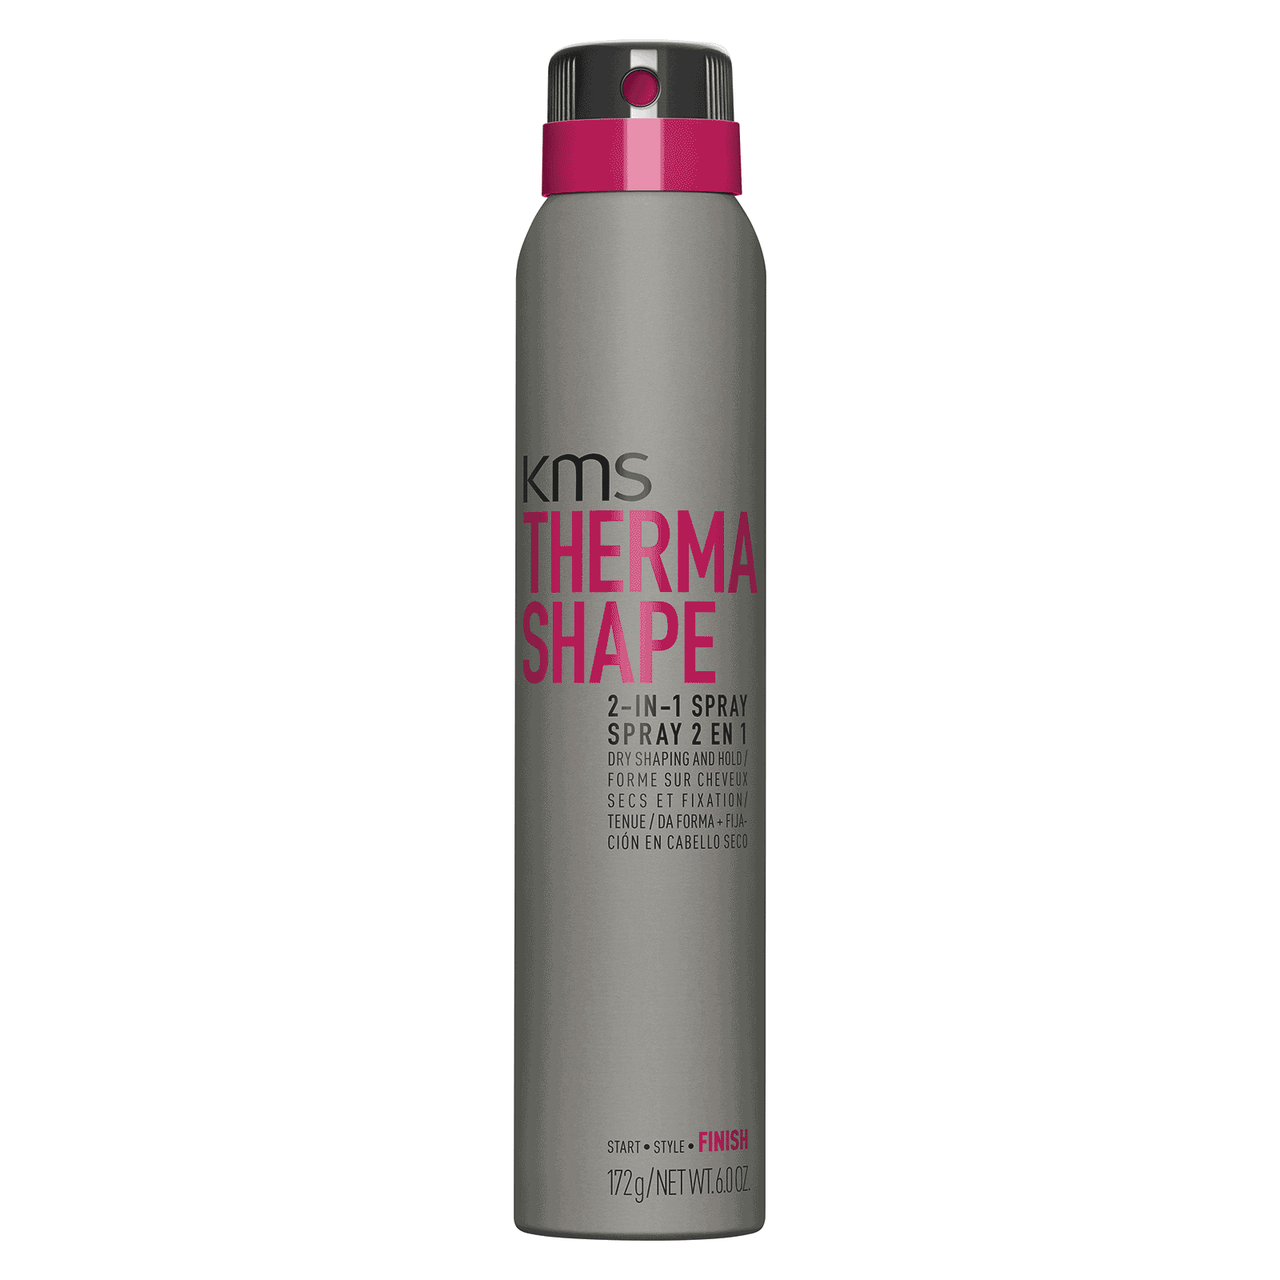 THERMASHAPE 2-In-1 Spray - Hair Square Inc.